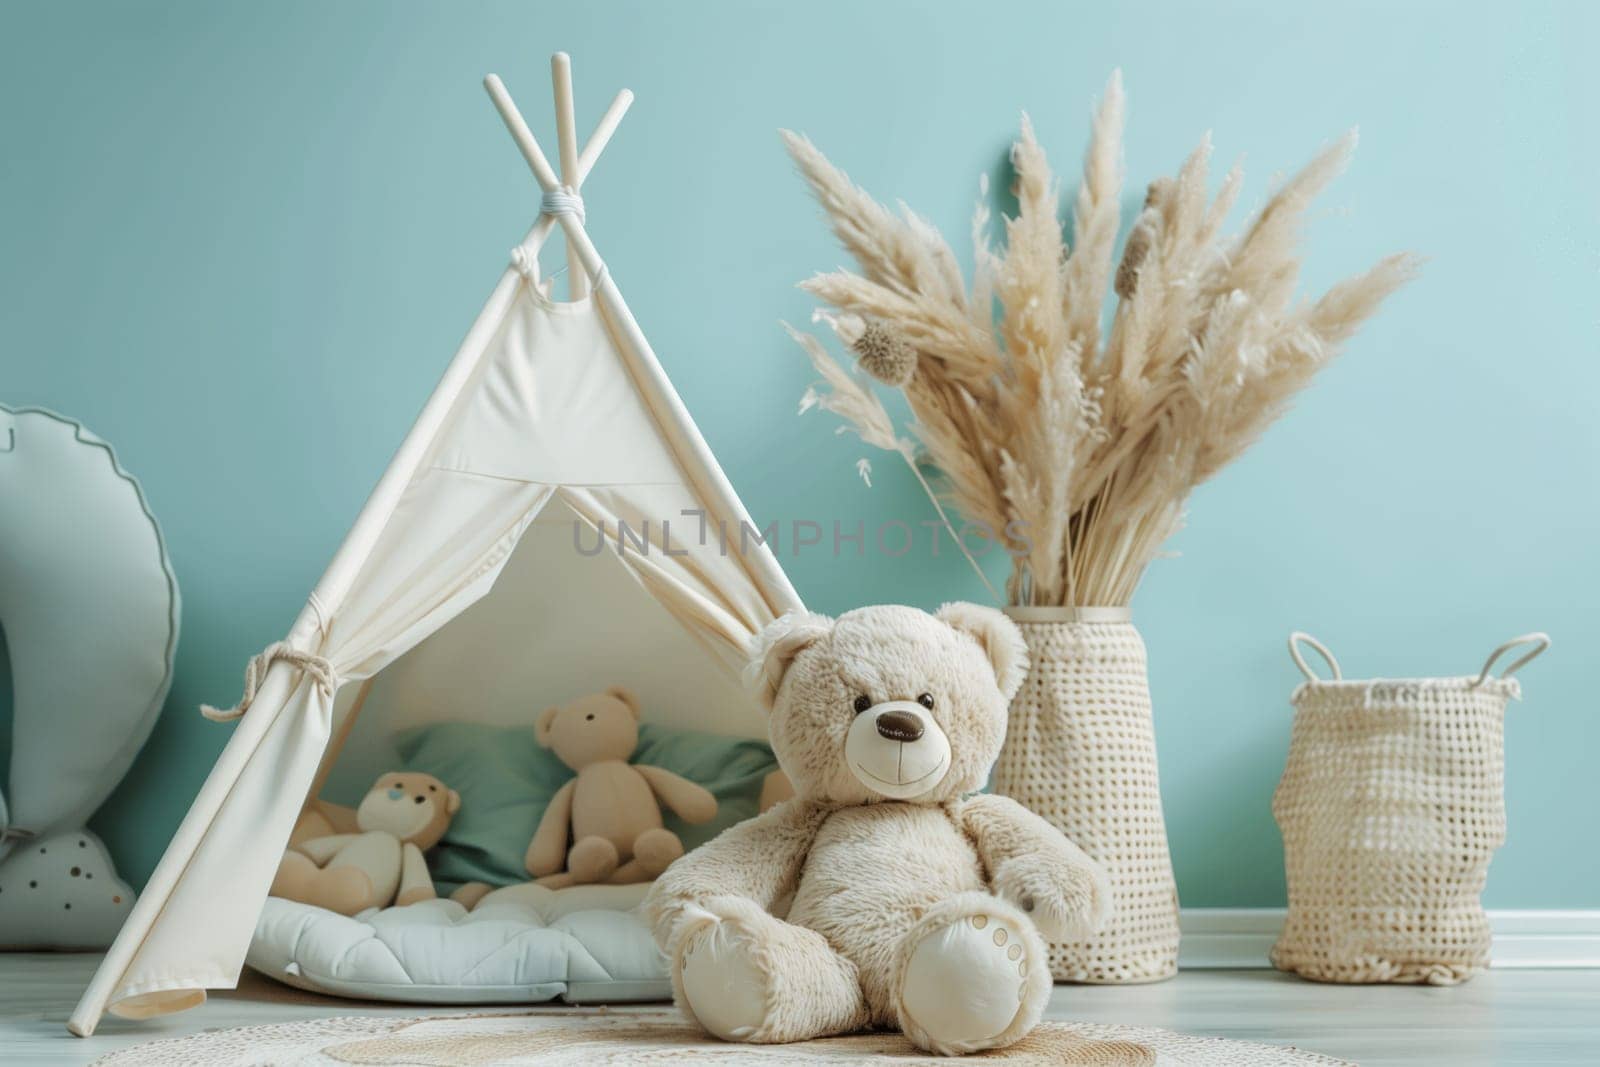 An artfully arranged photograph capturing a teddy bear seated in front of a teepee in a room, surrounded by a wooden chair, table, and twig. The scene evokes a tranquil and cozy atmosphere